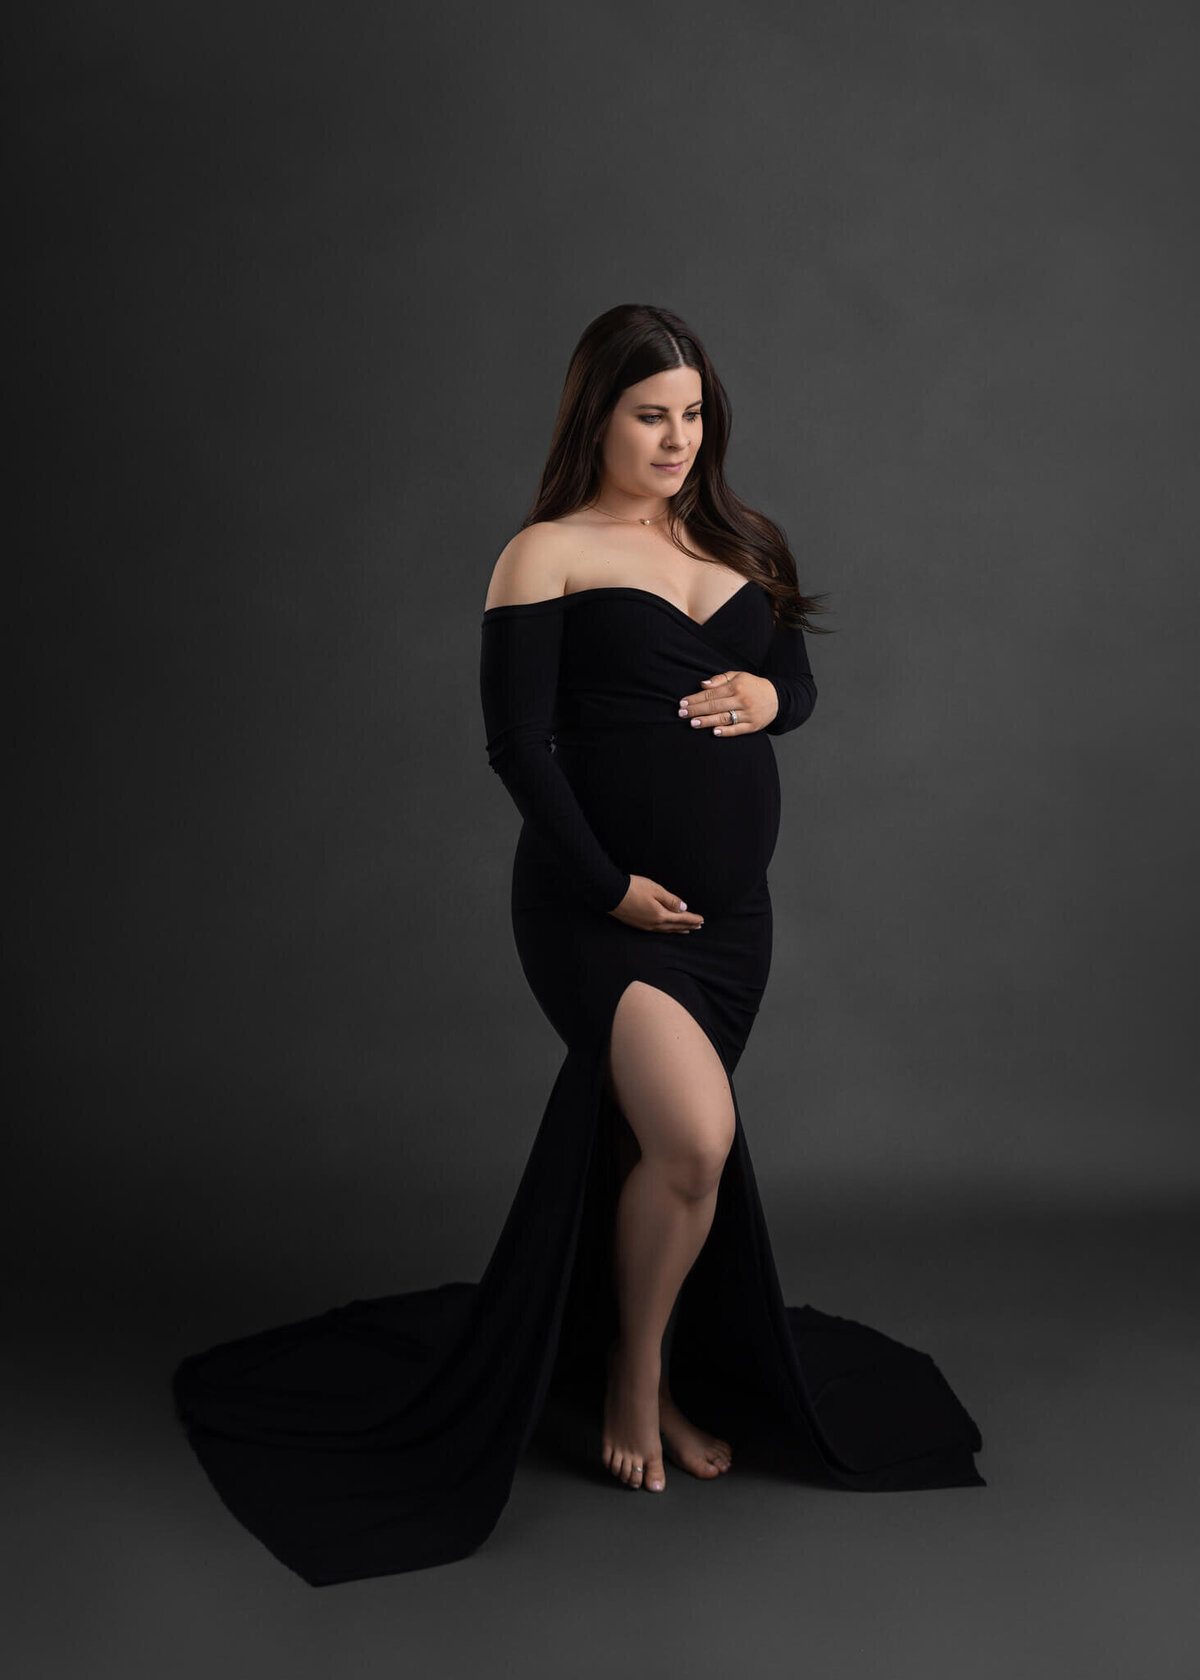 pregnant mom cradling her belly wearing a black dress